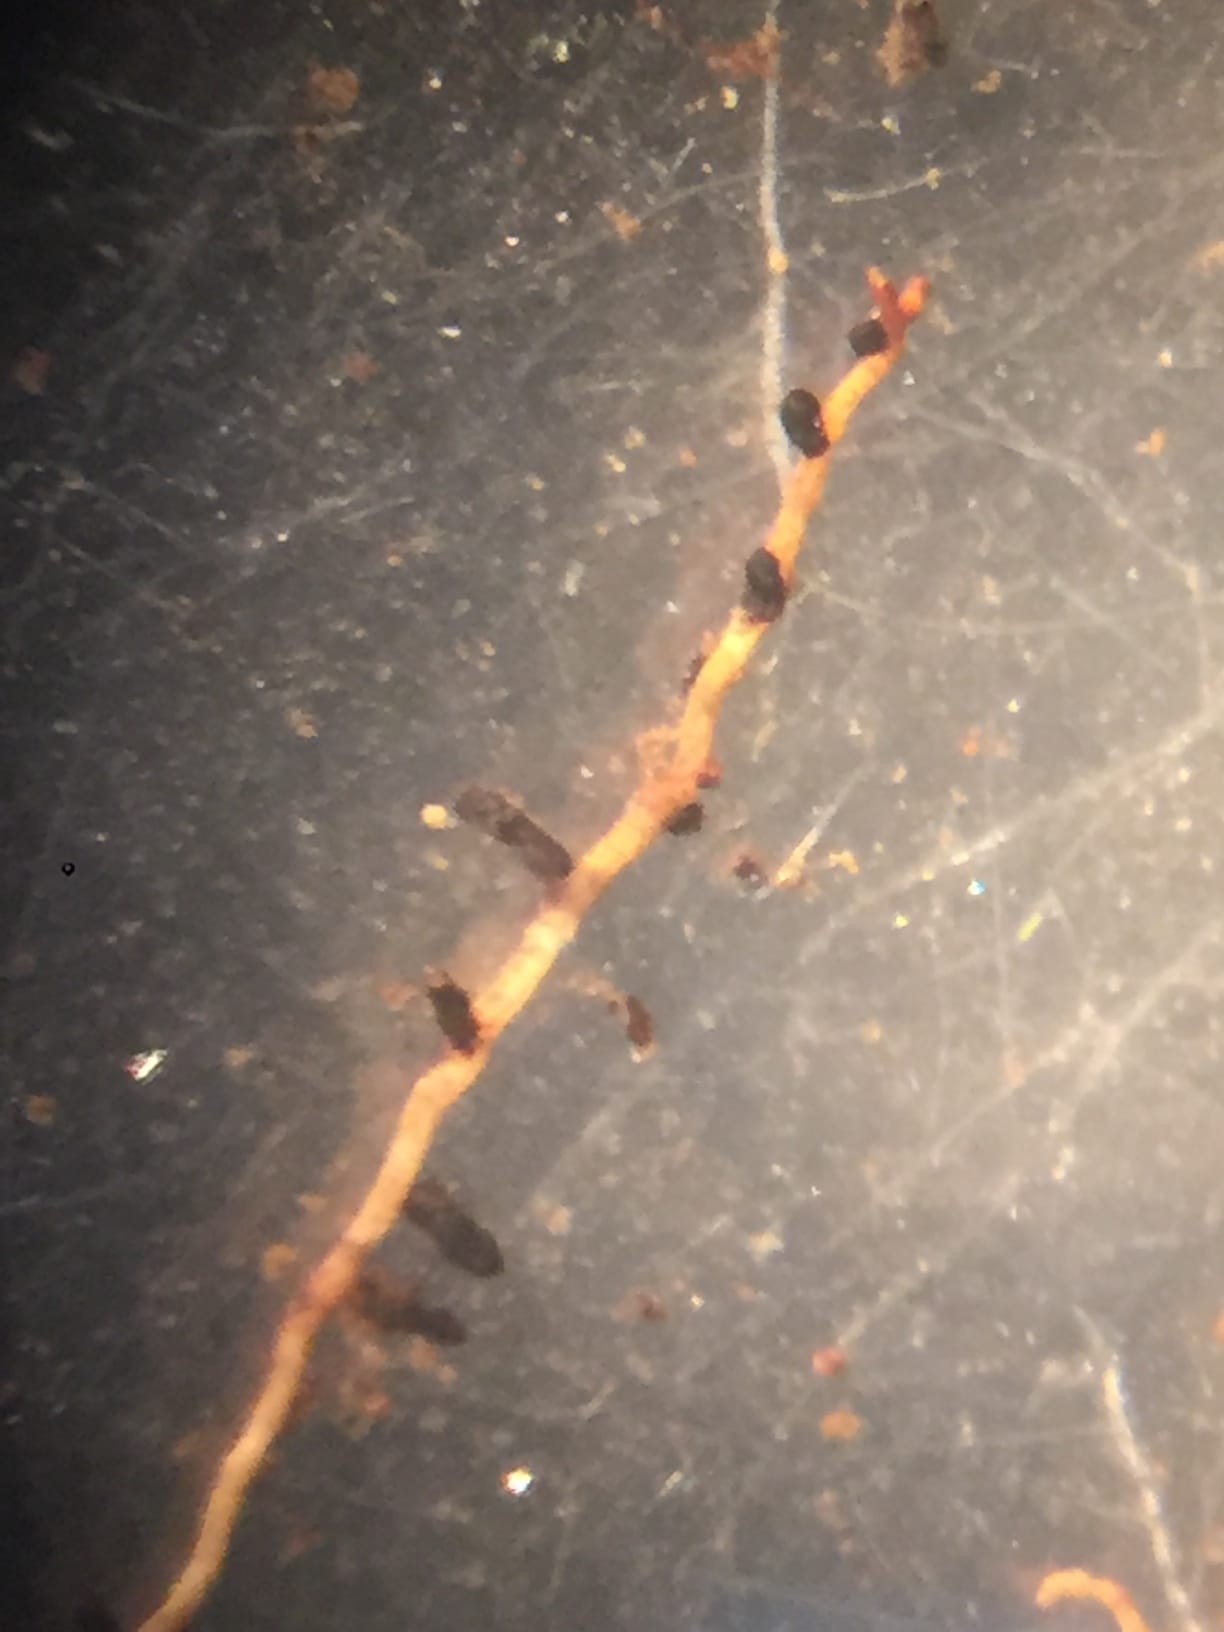 Black ectomycorrhizae cover birch root tips in this photo taken under the microscope.